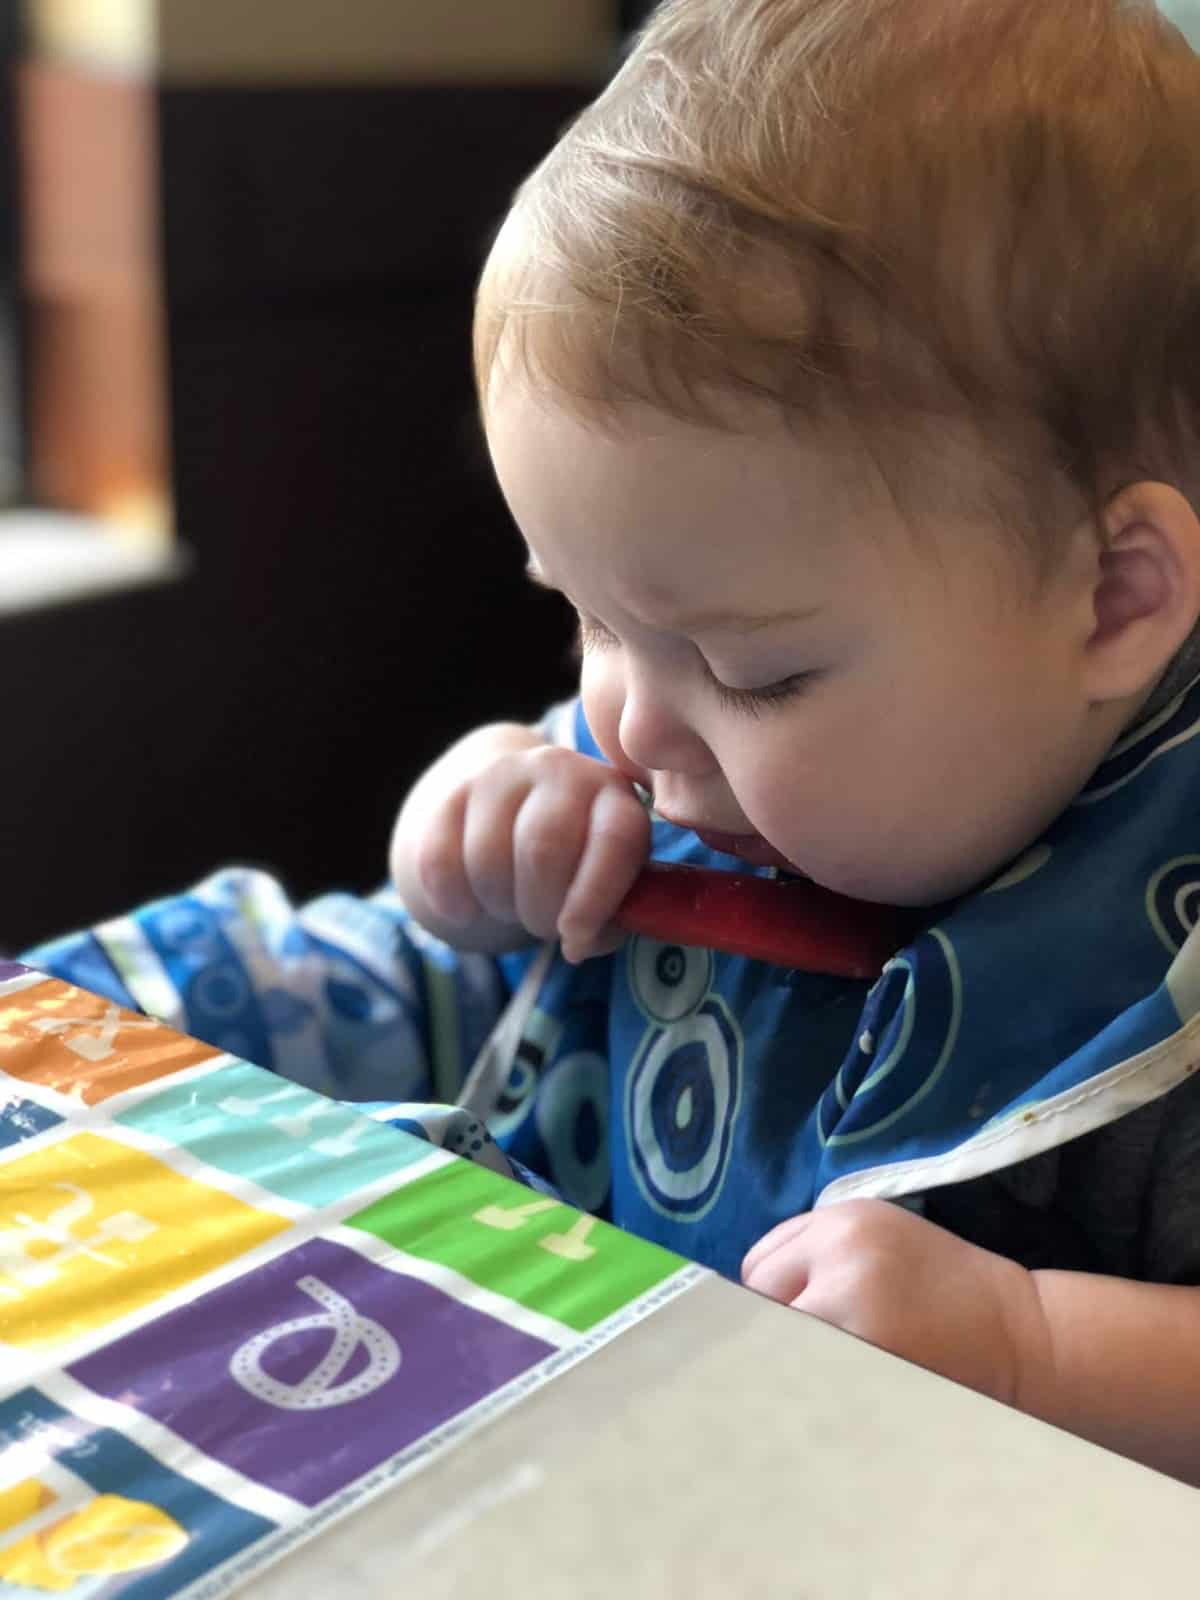 30 Best First Foods Using Baby Led Weaning - 3 Months Worth of Feeding Ideas for Your Baby when introducing solids using BLW!